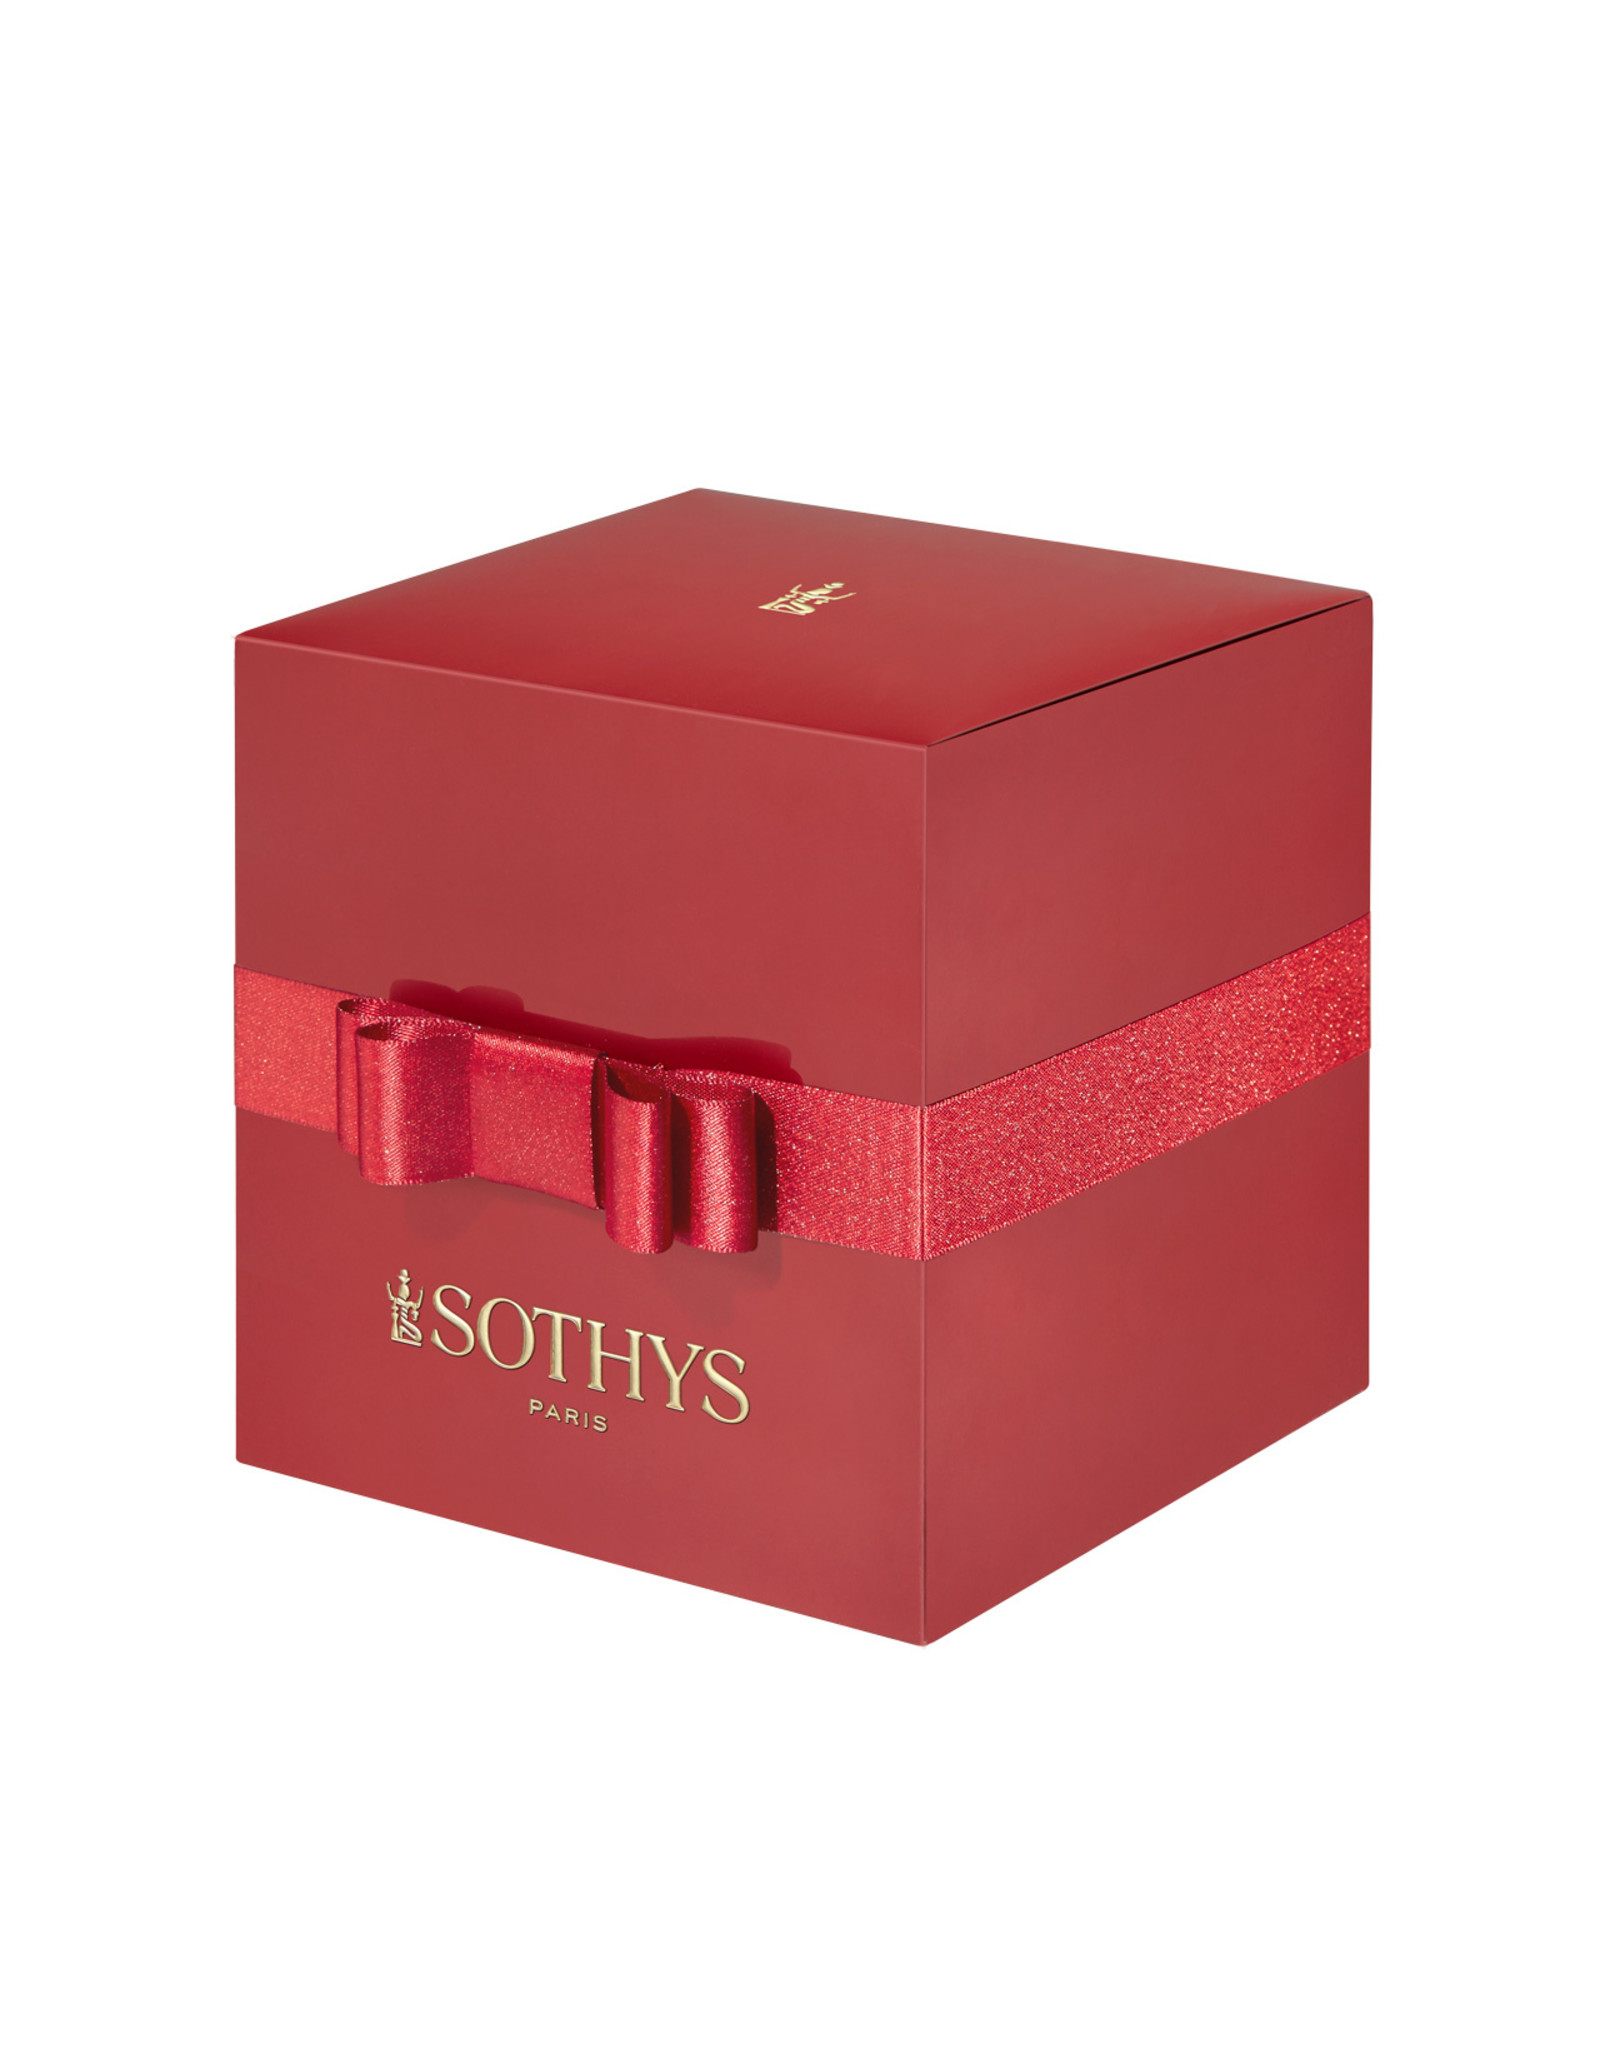 SOTHYS Gift box without content